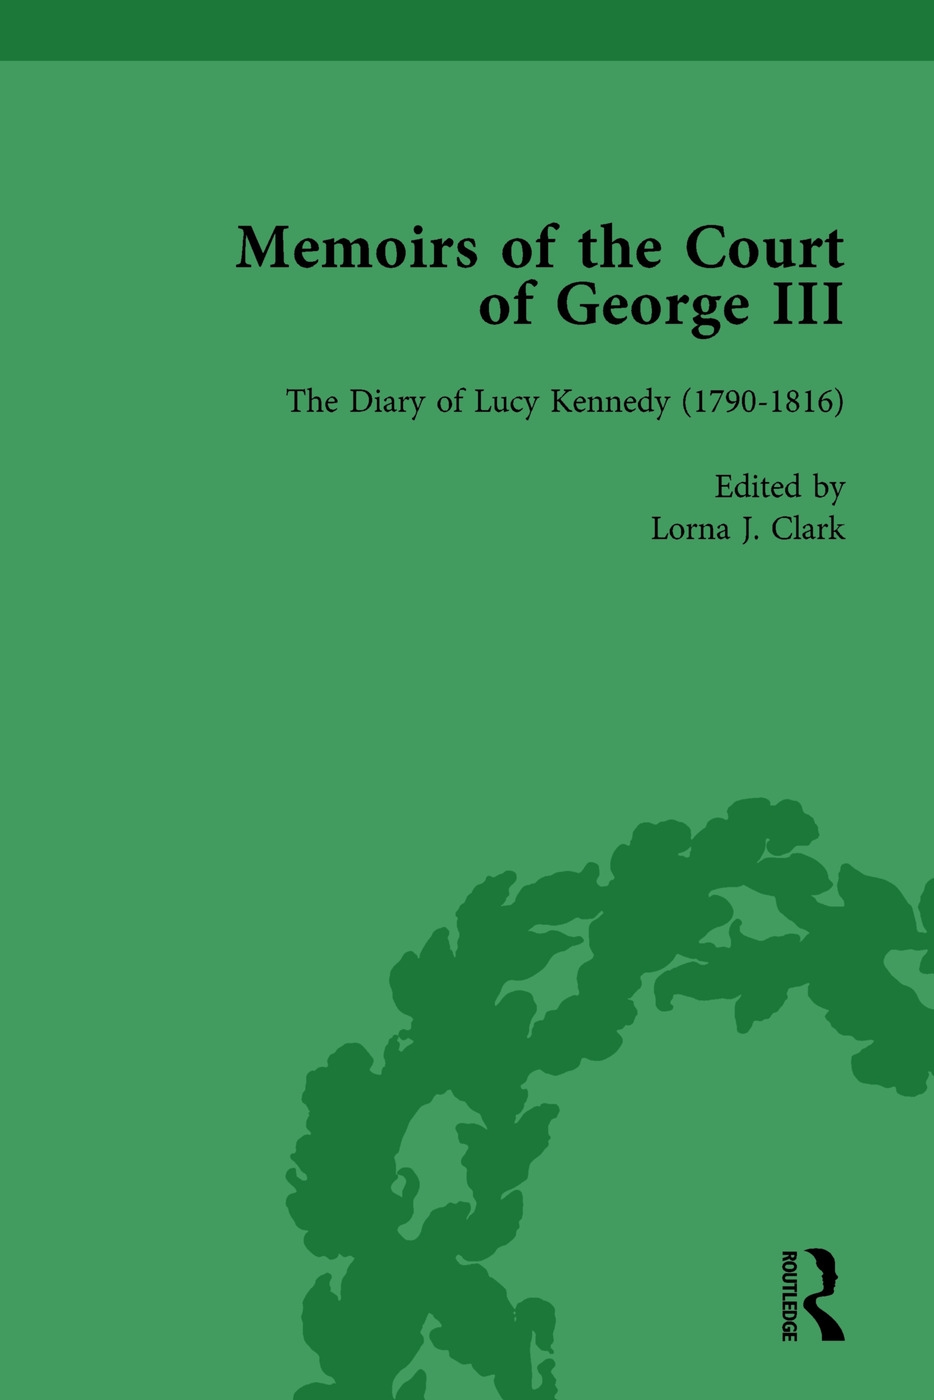 The Diary of Lucy Kennedy (1793- 1816): Memoirs of the Court of George III, Volume 3